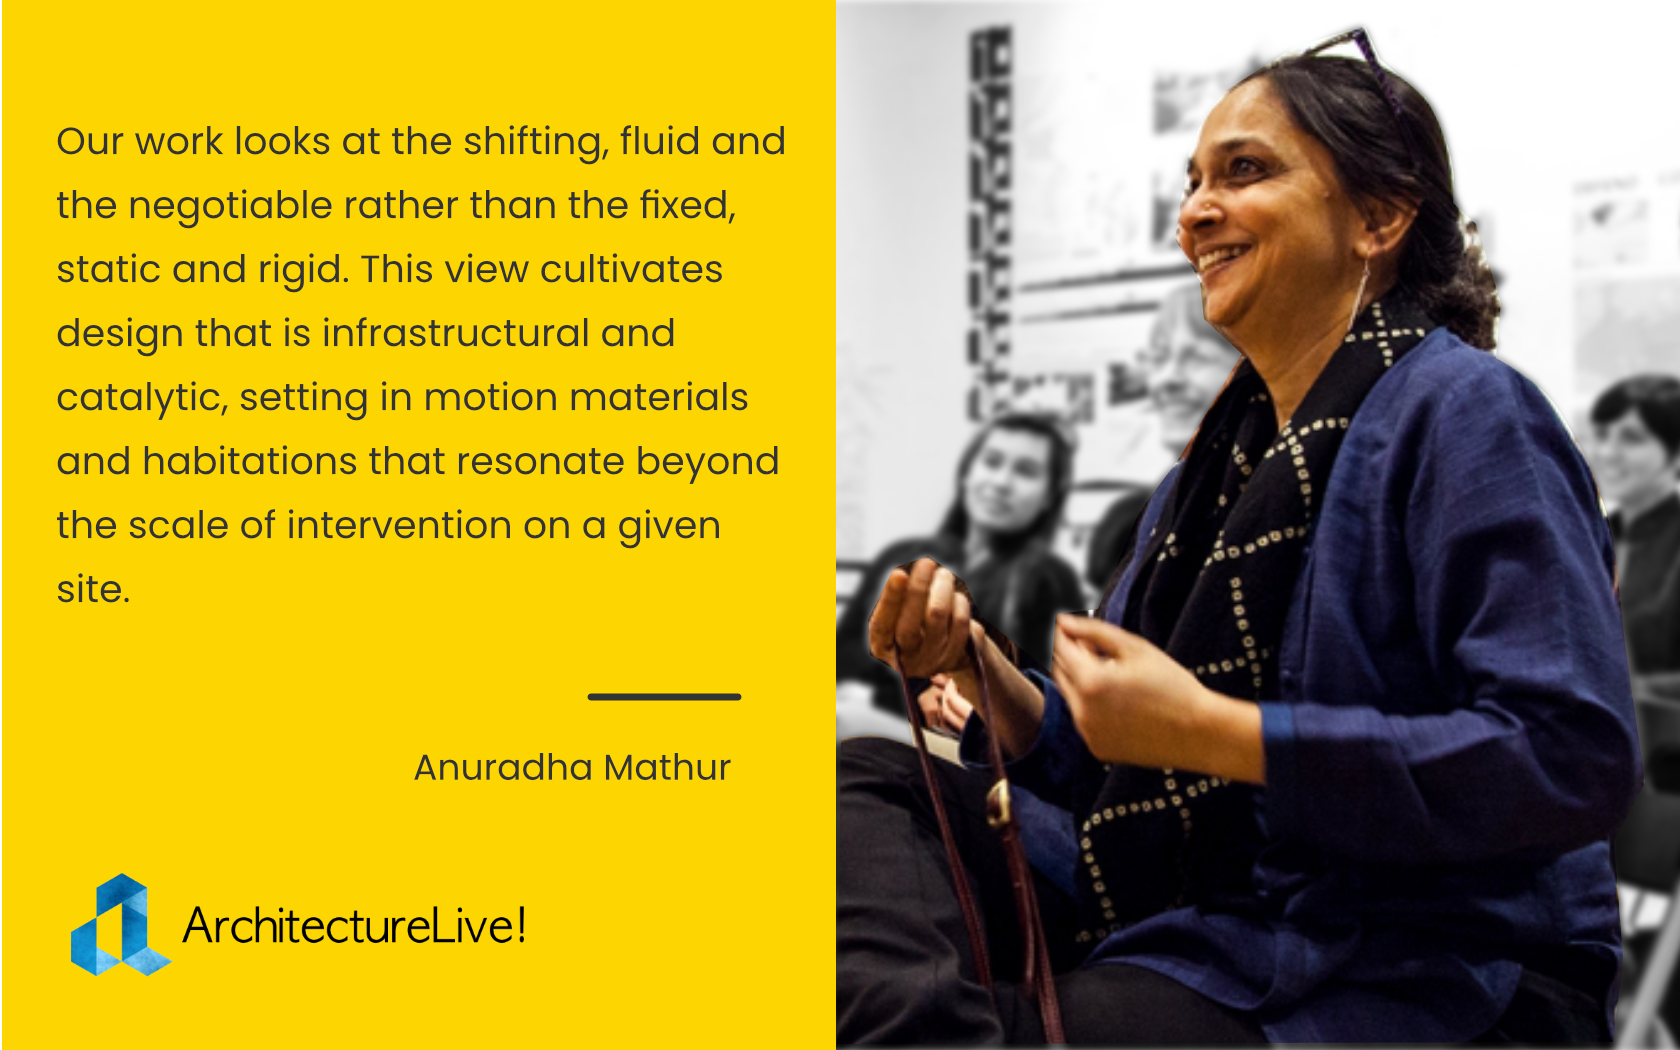 Quote by Landscape Architect Anuradha Mathur